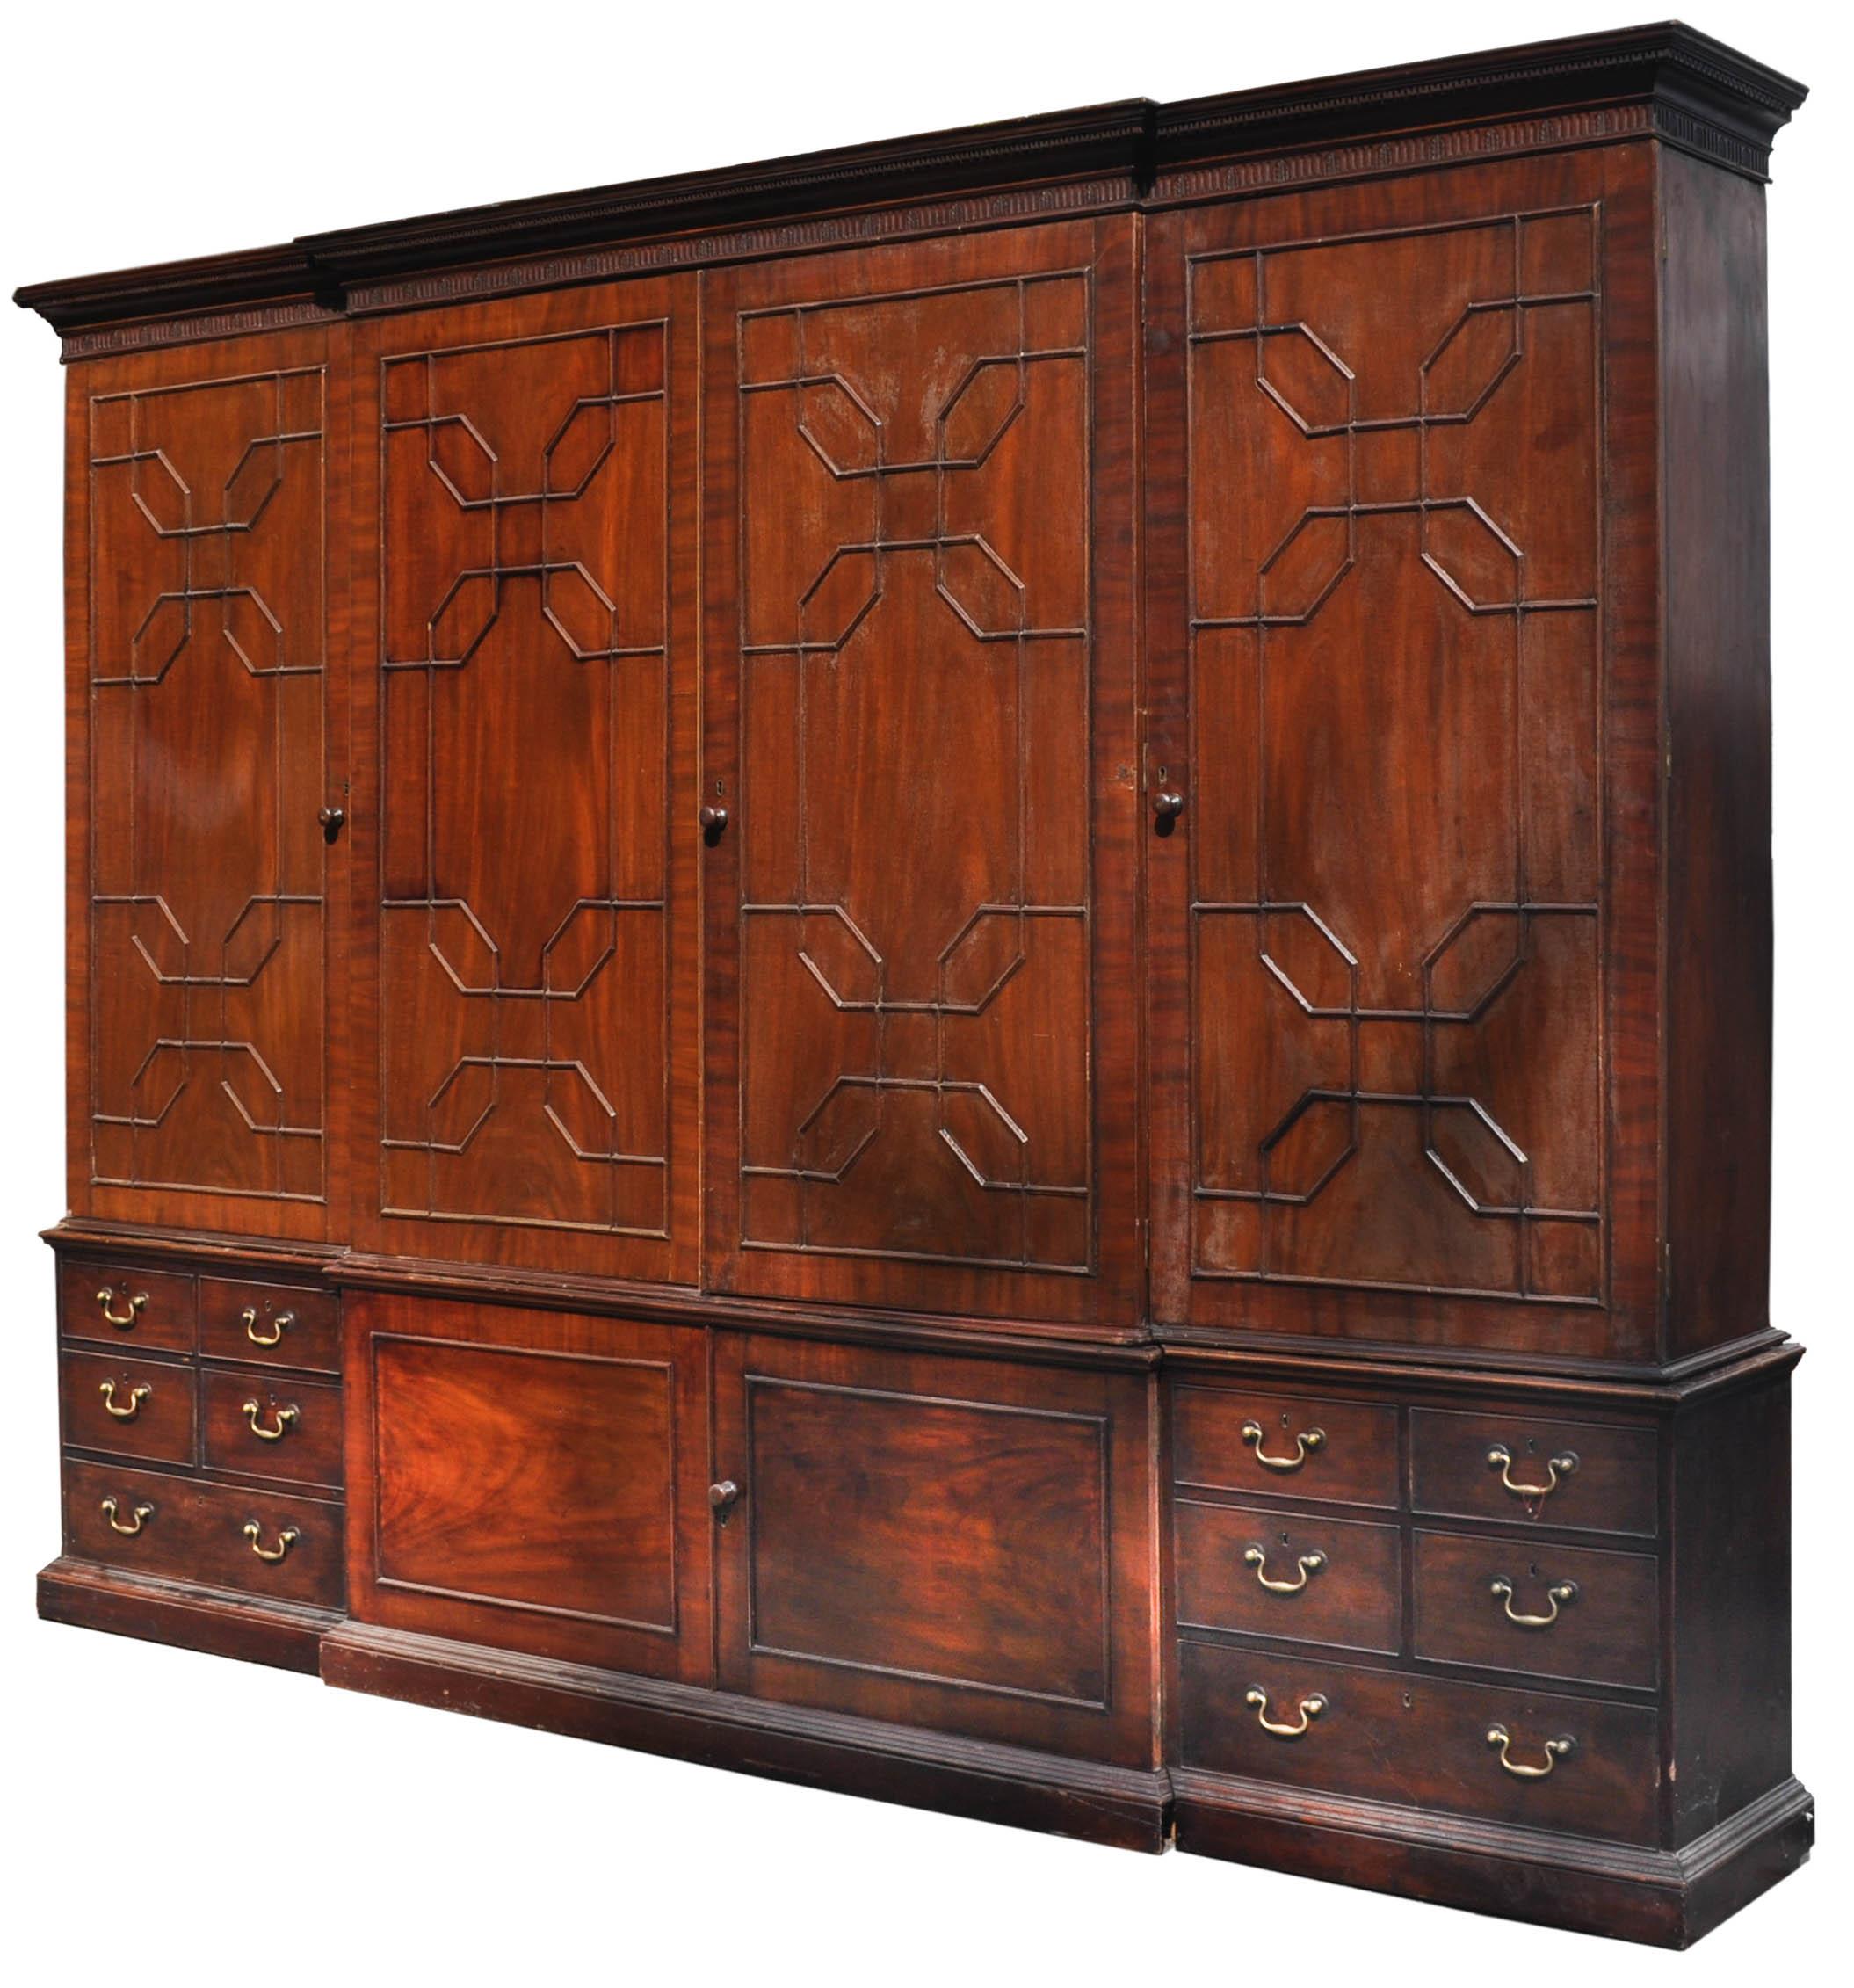 George III Monumental Georgian Antique Mahogany Breakfront Bibliotheque Library Bookcase